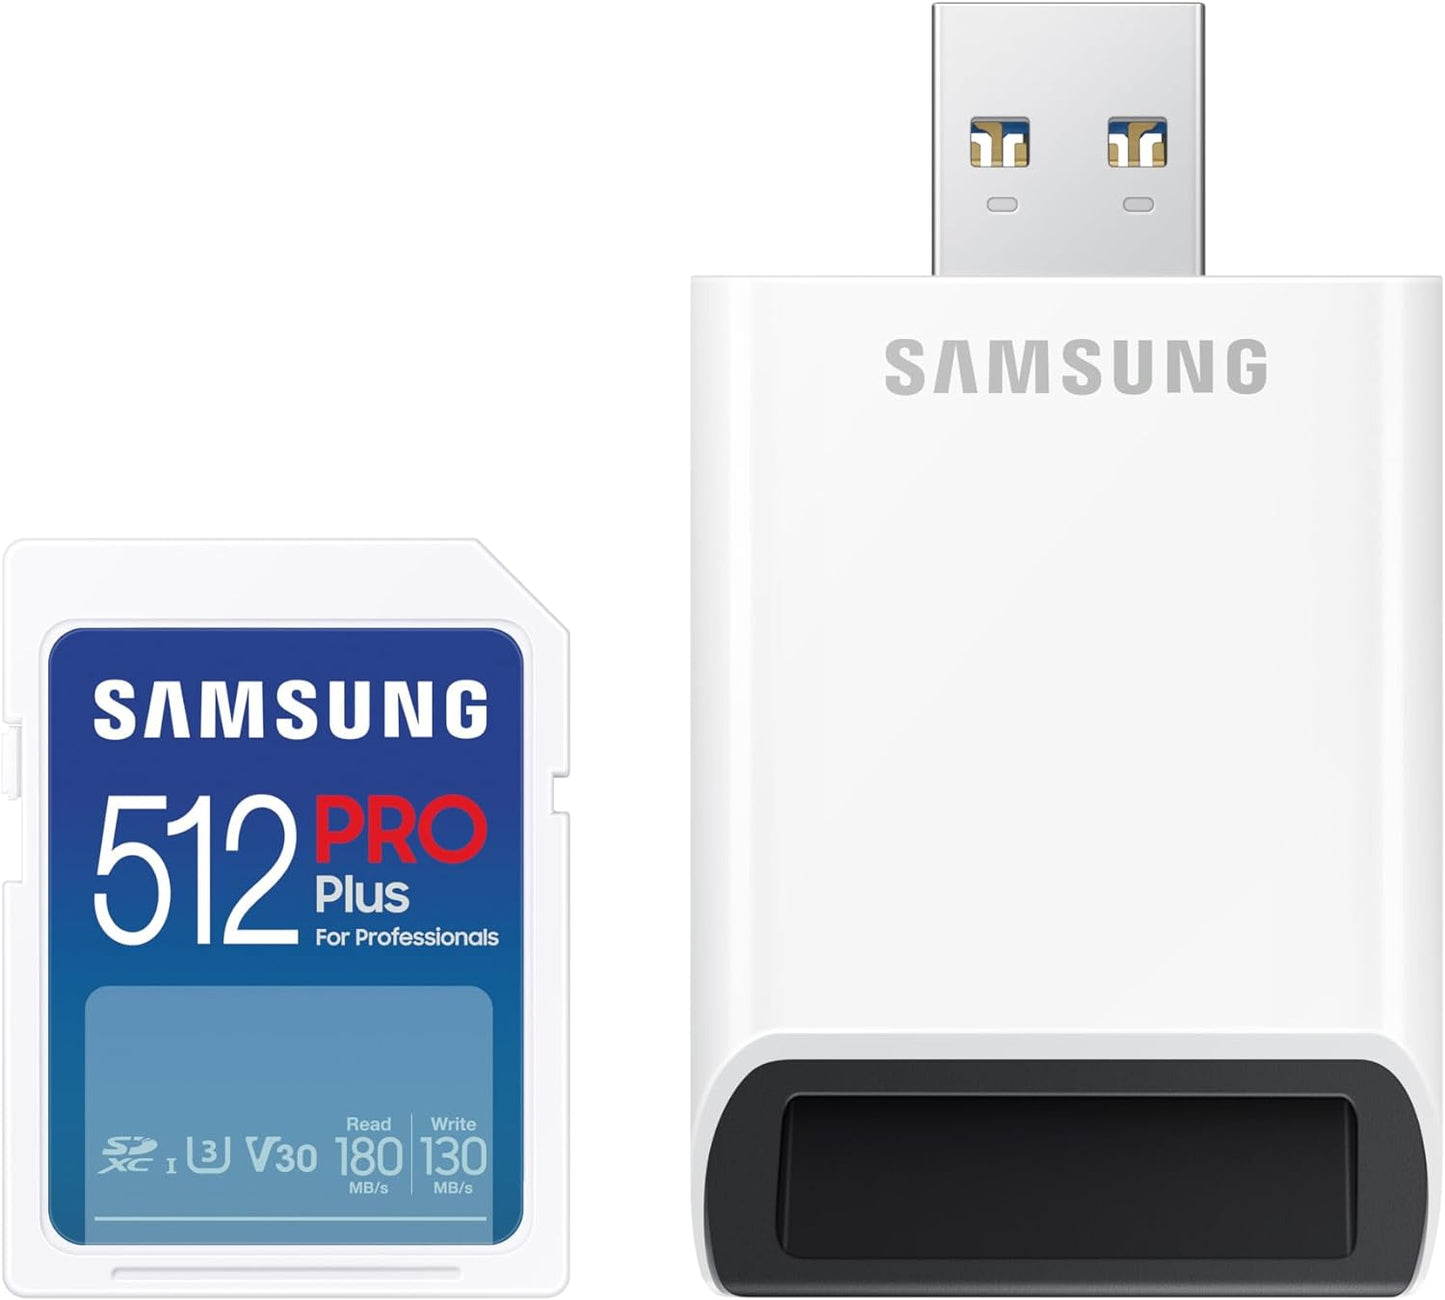 Samsung 512GB Pro Plus SD Memory Card with Reader - SDXC